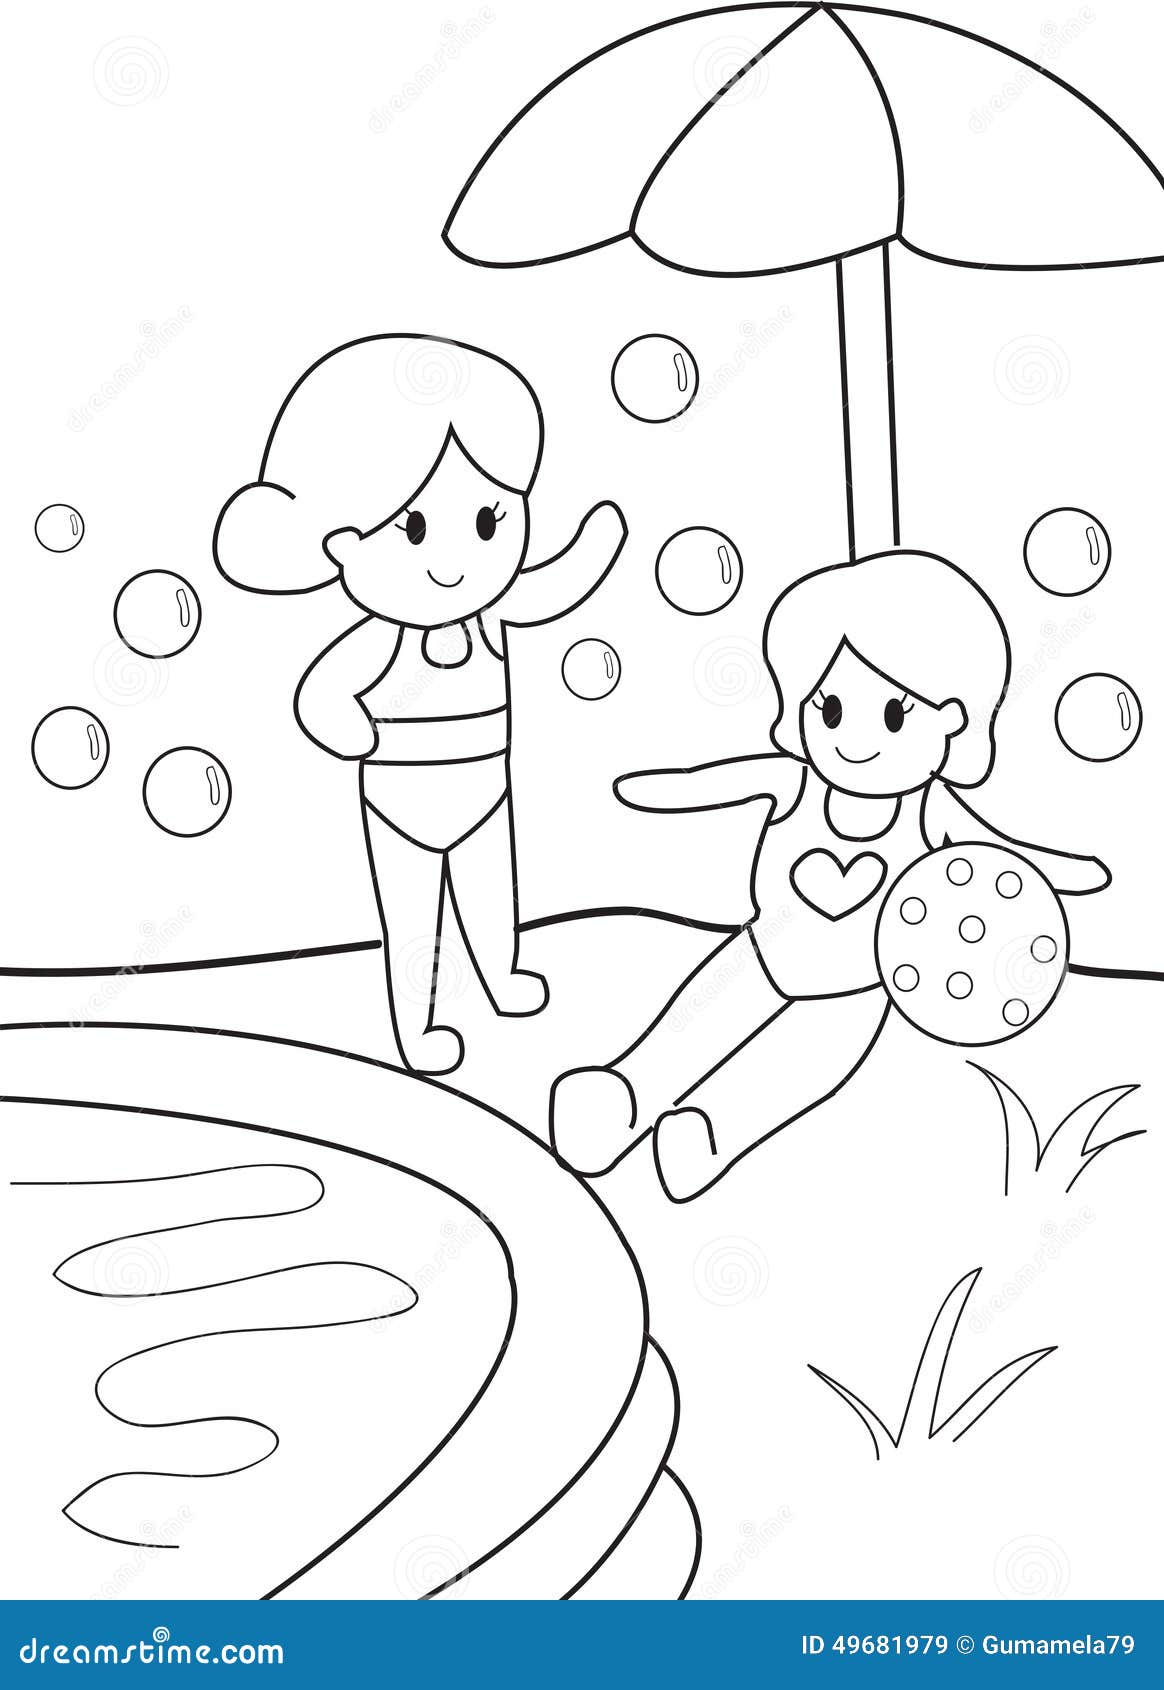 Girls By The Pool, Kid Coloring Page Illustration 28 - Megapixl